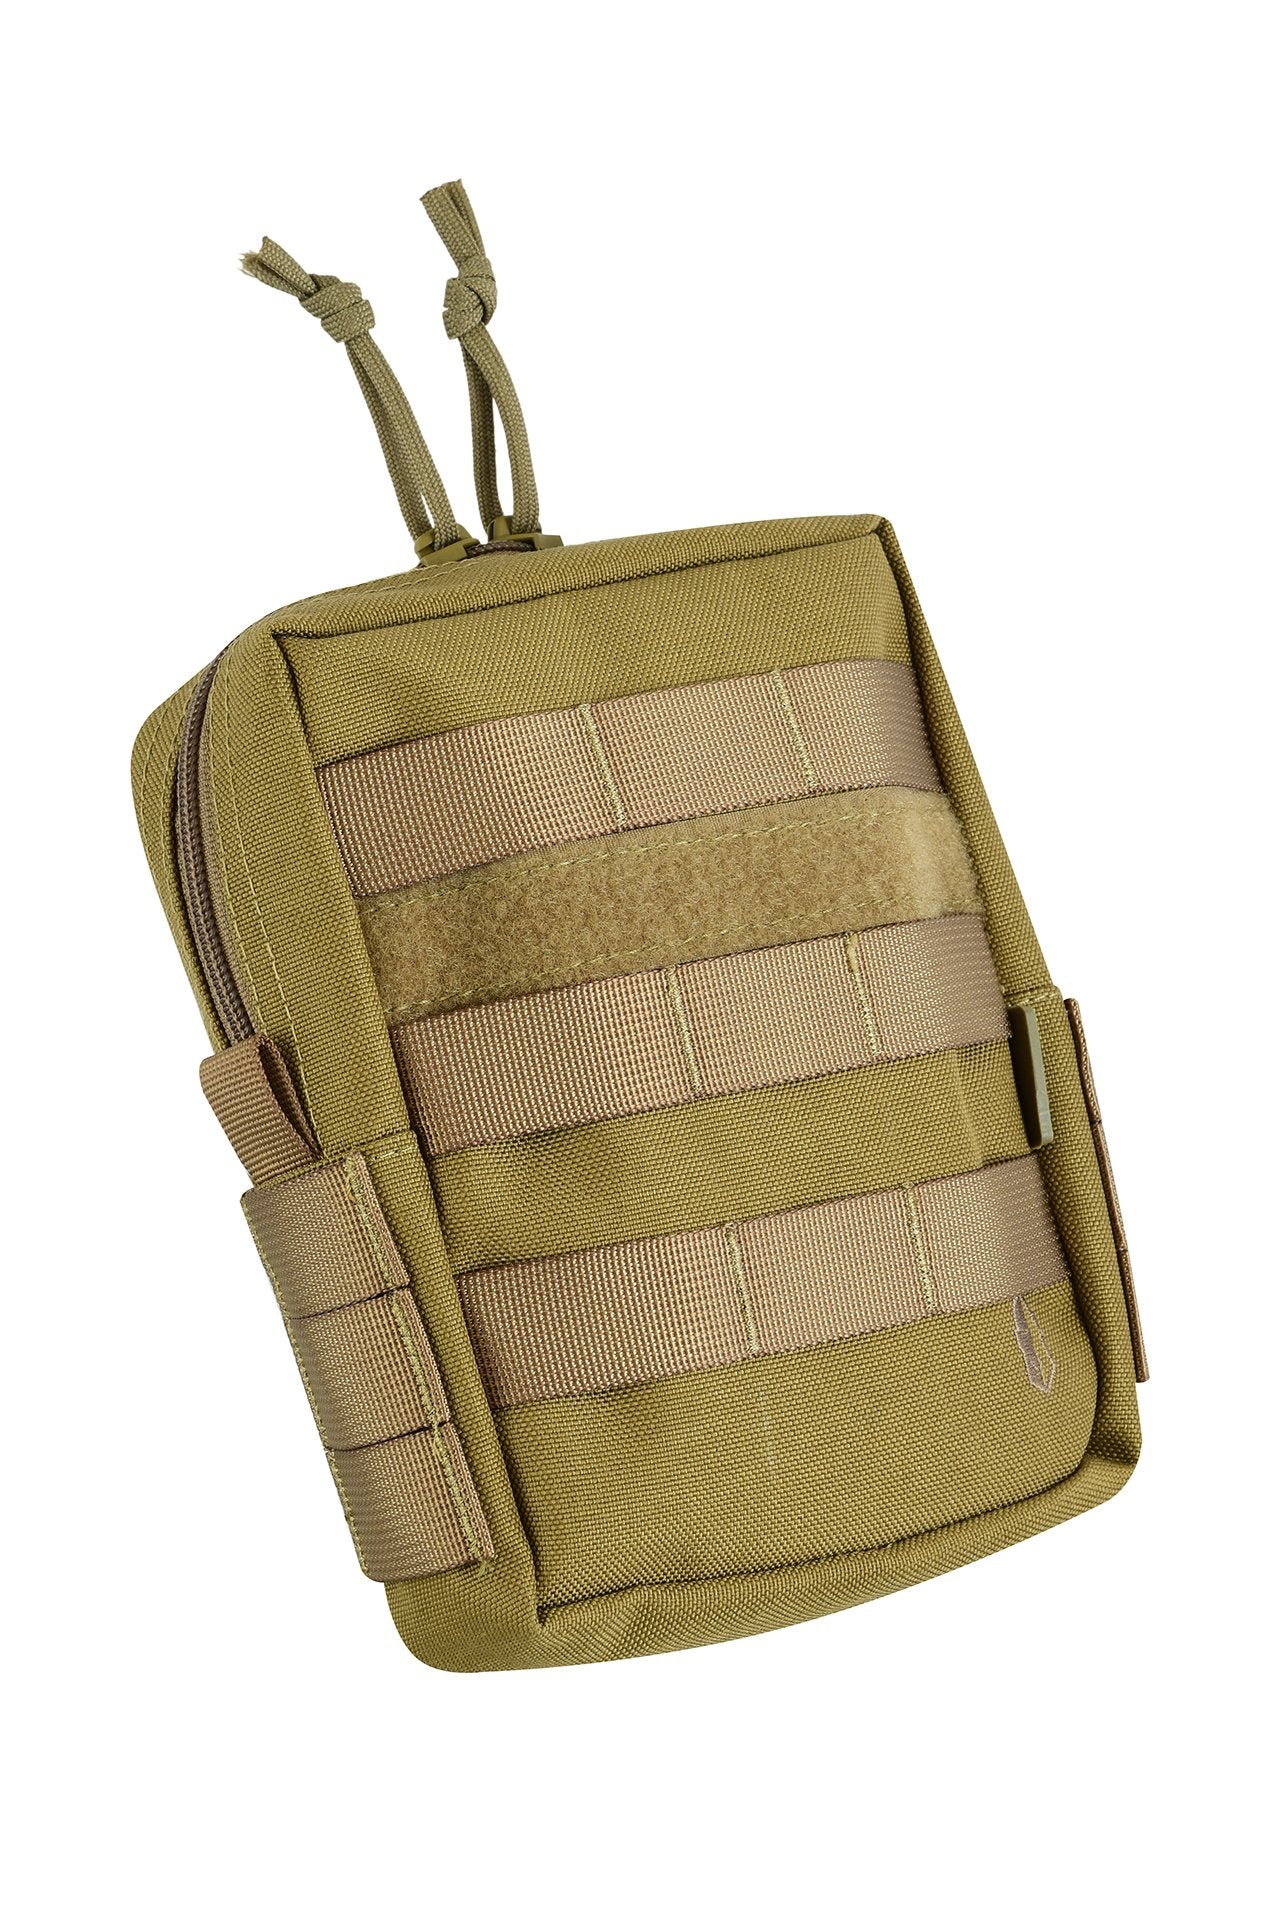 SHE-23034 MEDIUM UTILITY POUCH SAND COLOR